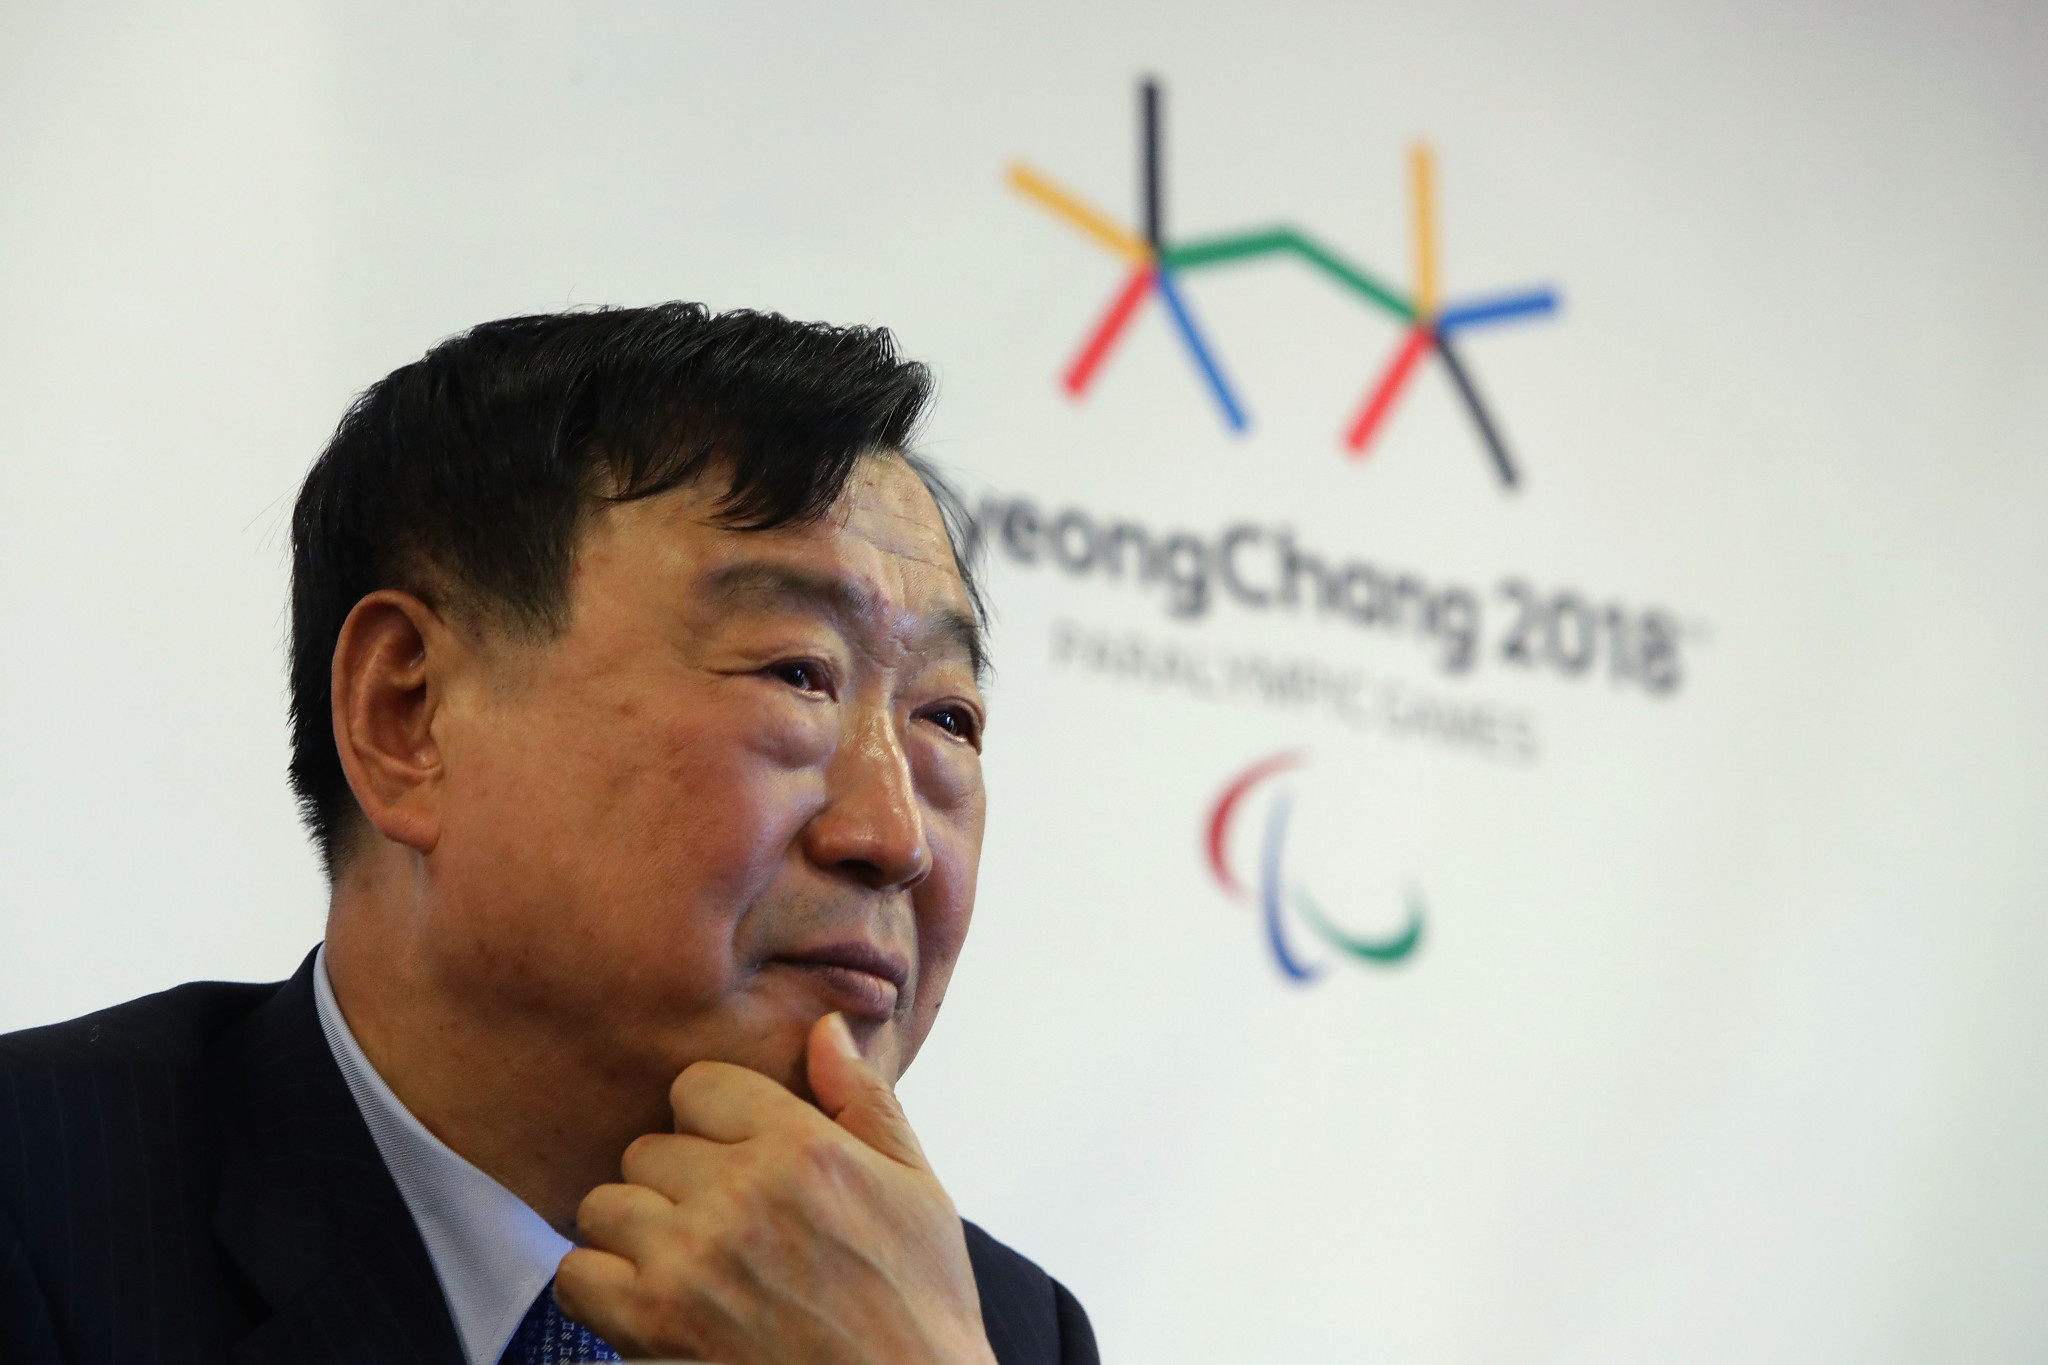 The rate of ticket sales for the Pyeongchang 2018 Winter Olympic and Paralympic Games, whose President is Pyeongchang 2018 President Lee Hee-beom, is extremely slow ©Getty Images